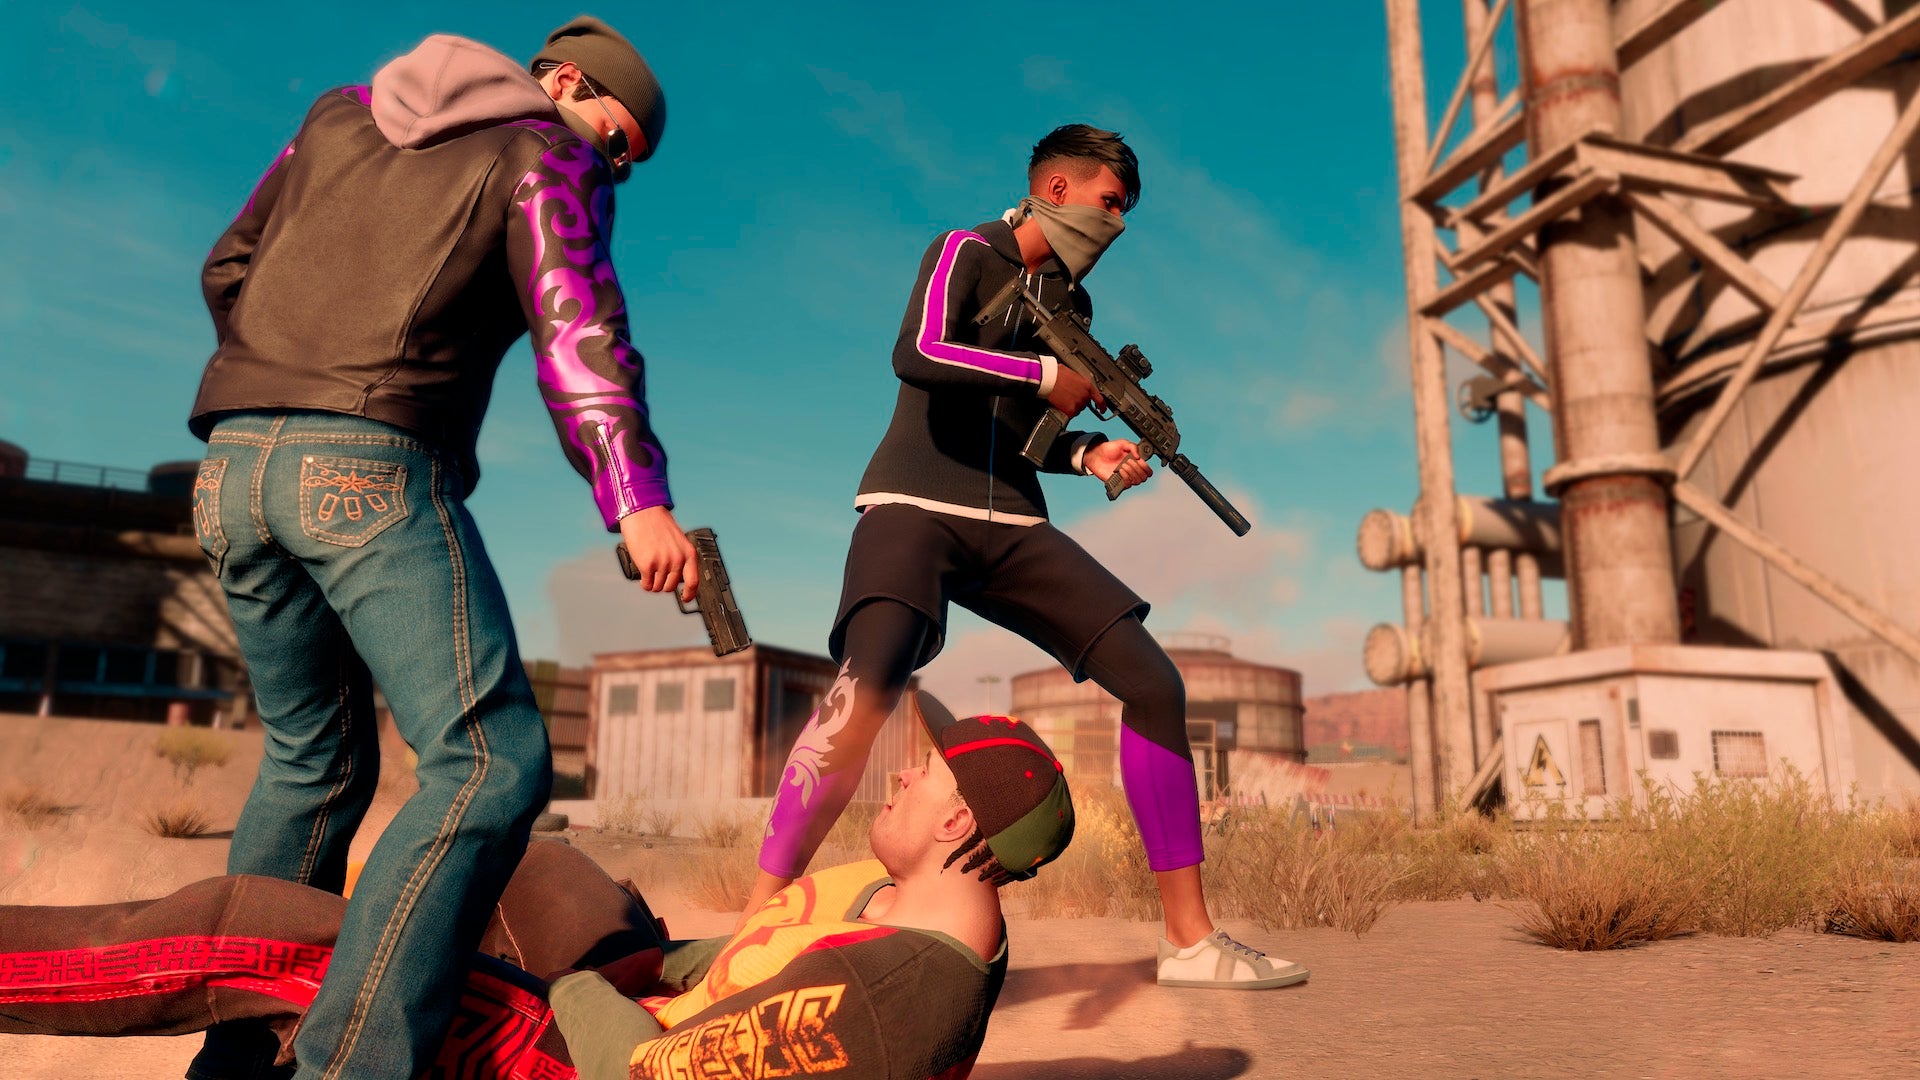 Two members of the Saints threaten a passerby in Saints Row.